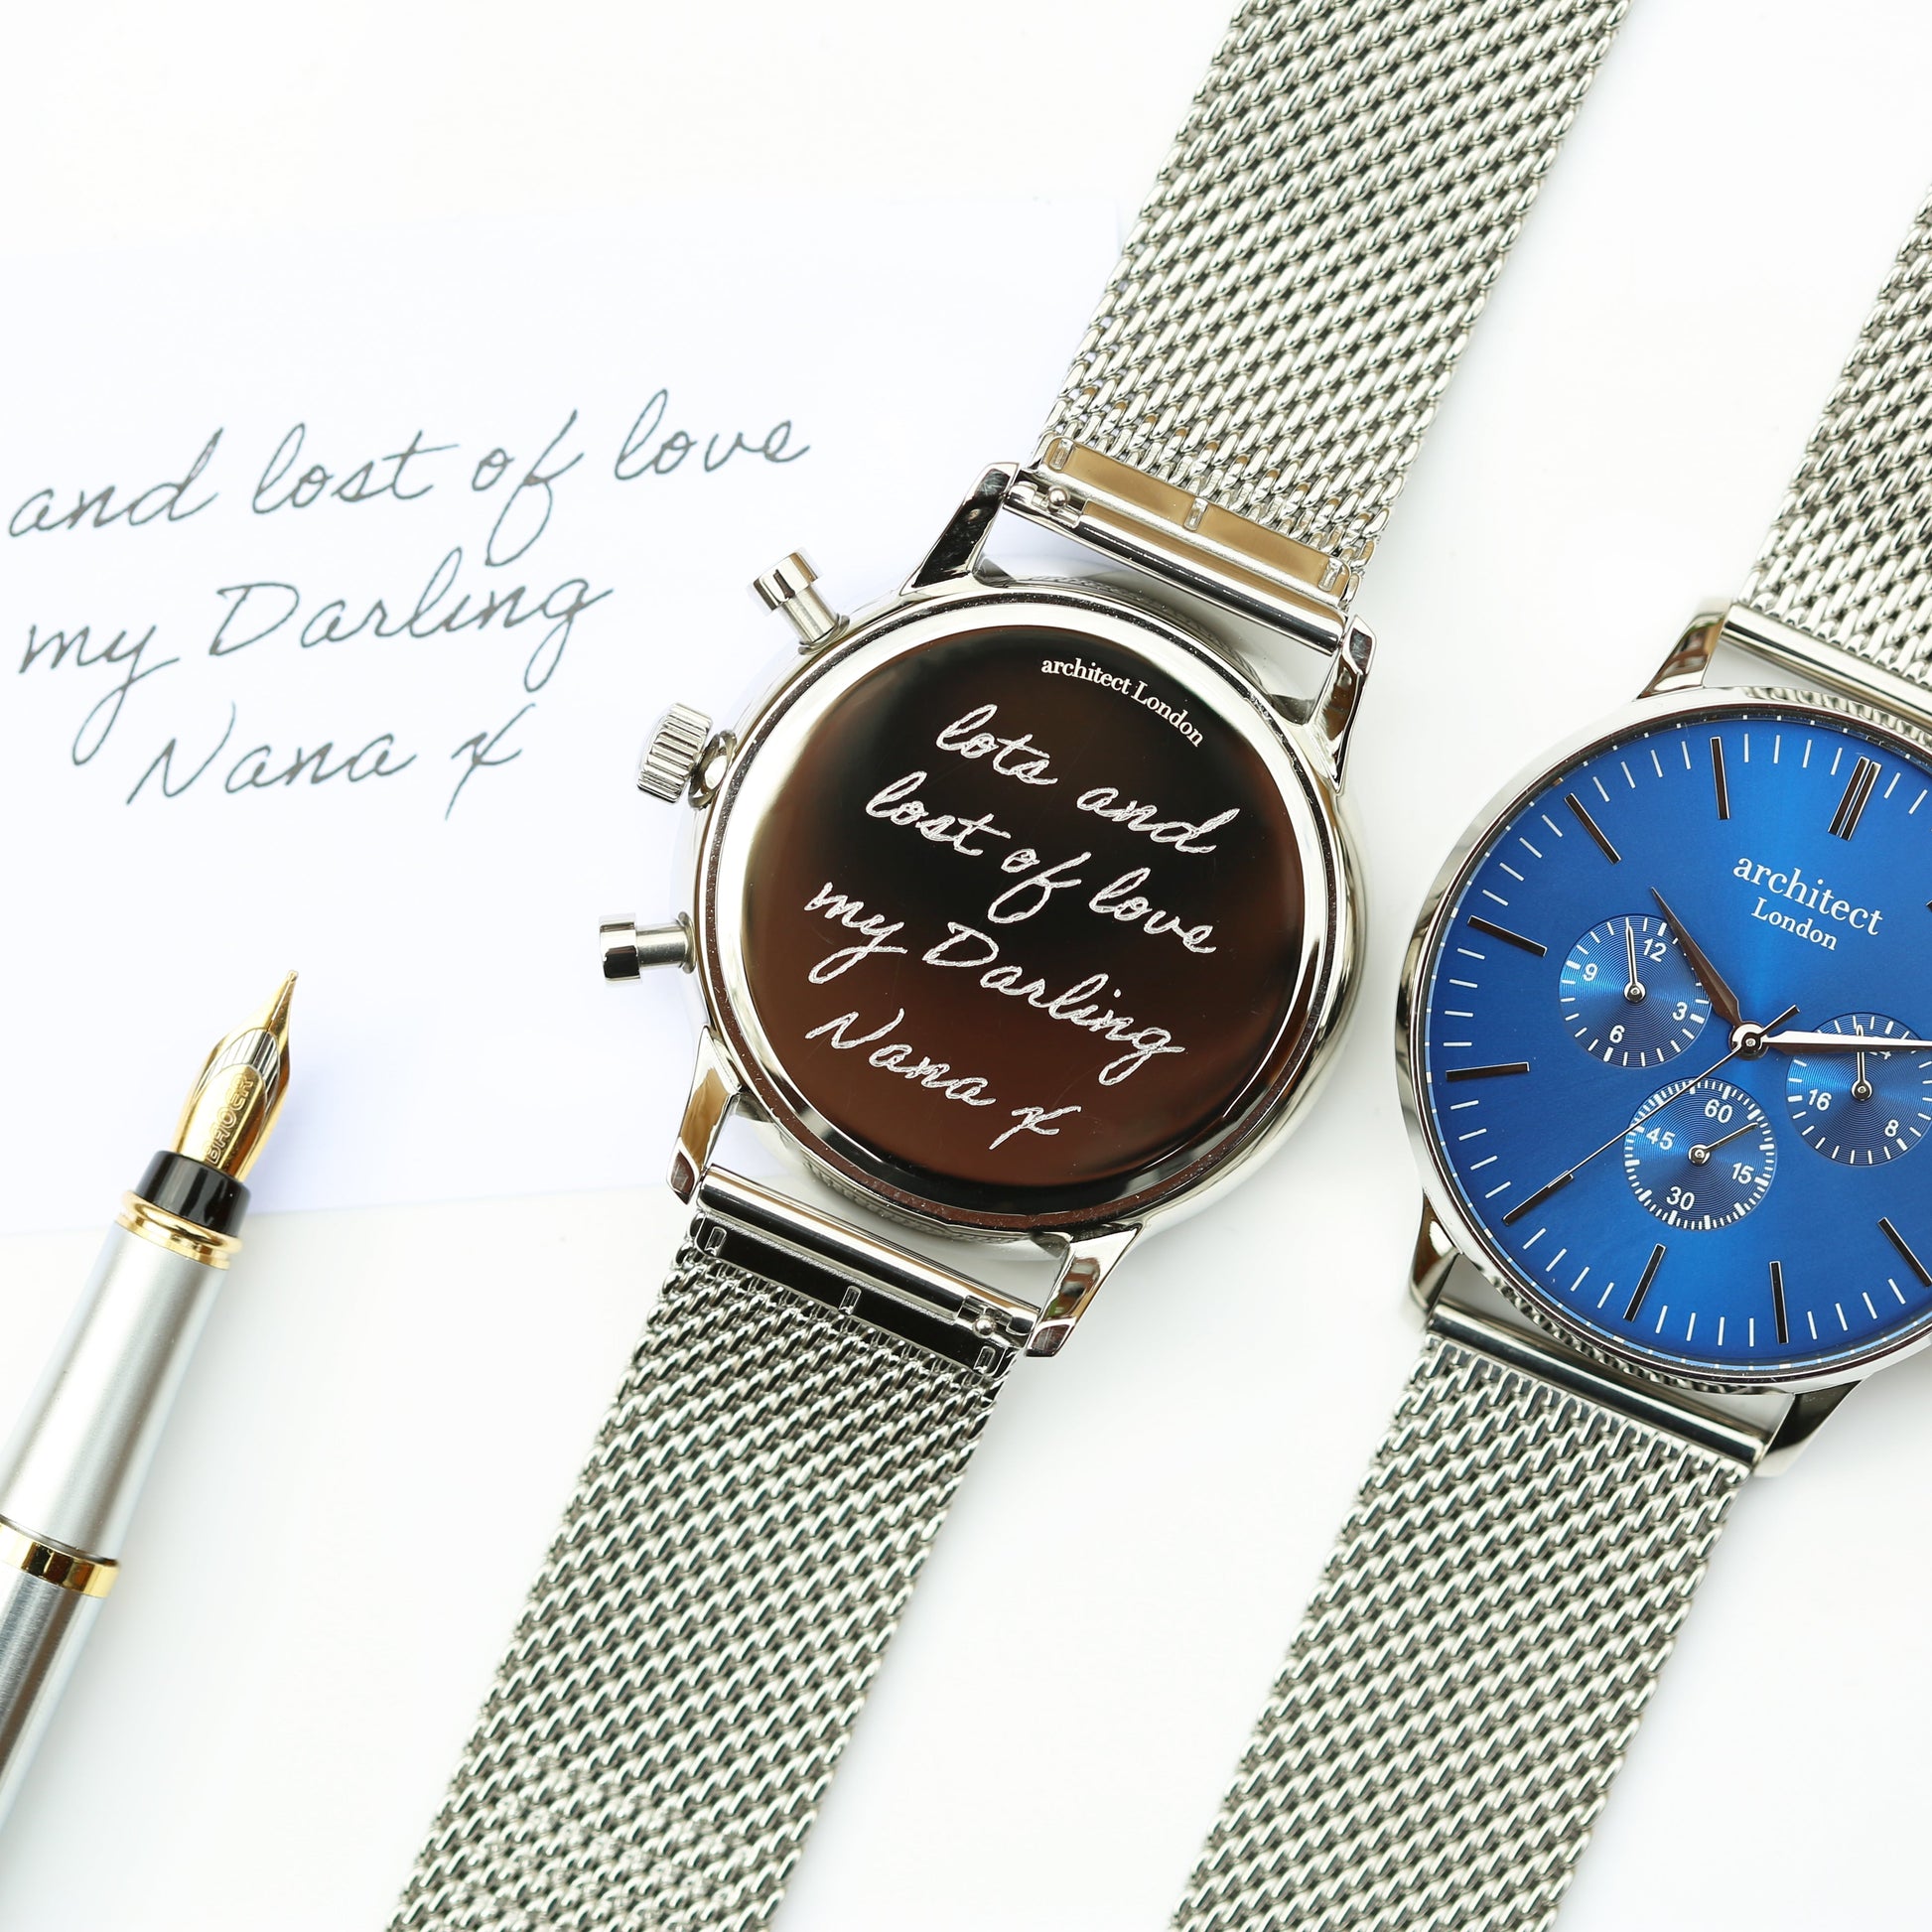 Personalized Men's Watches - Men's Handwriting Engraved Watch In Blue Face Silver 